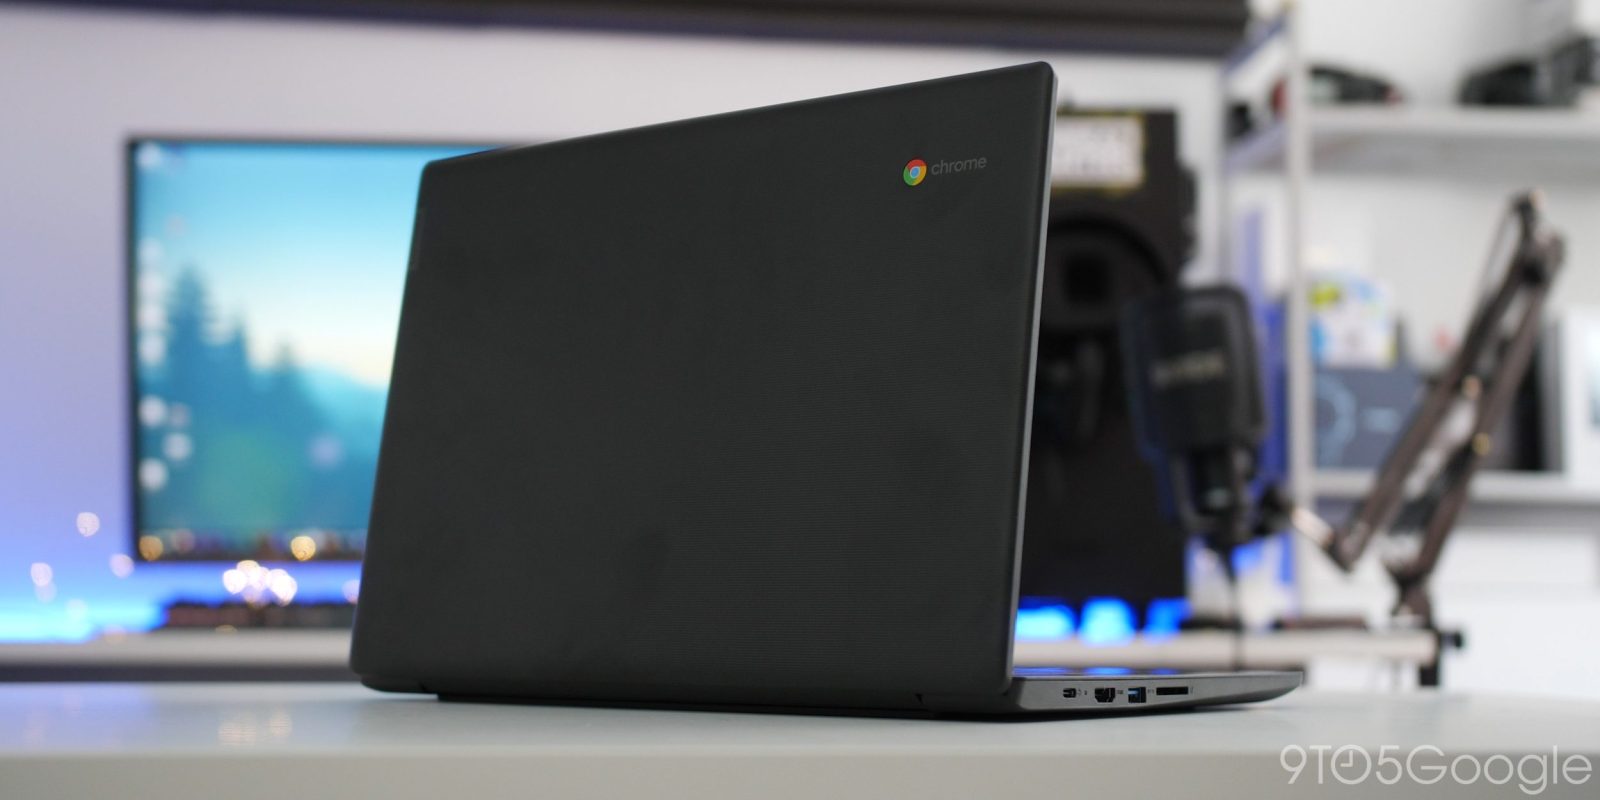 5 reasons why Chromebooks are the perfect laptop for most people